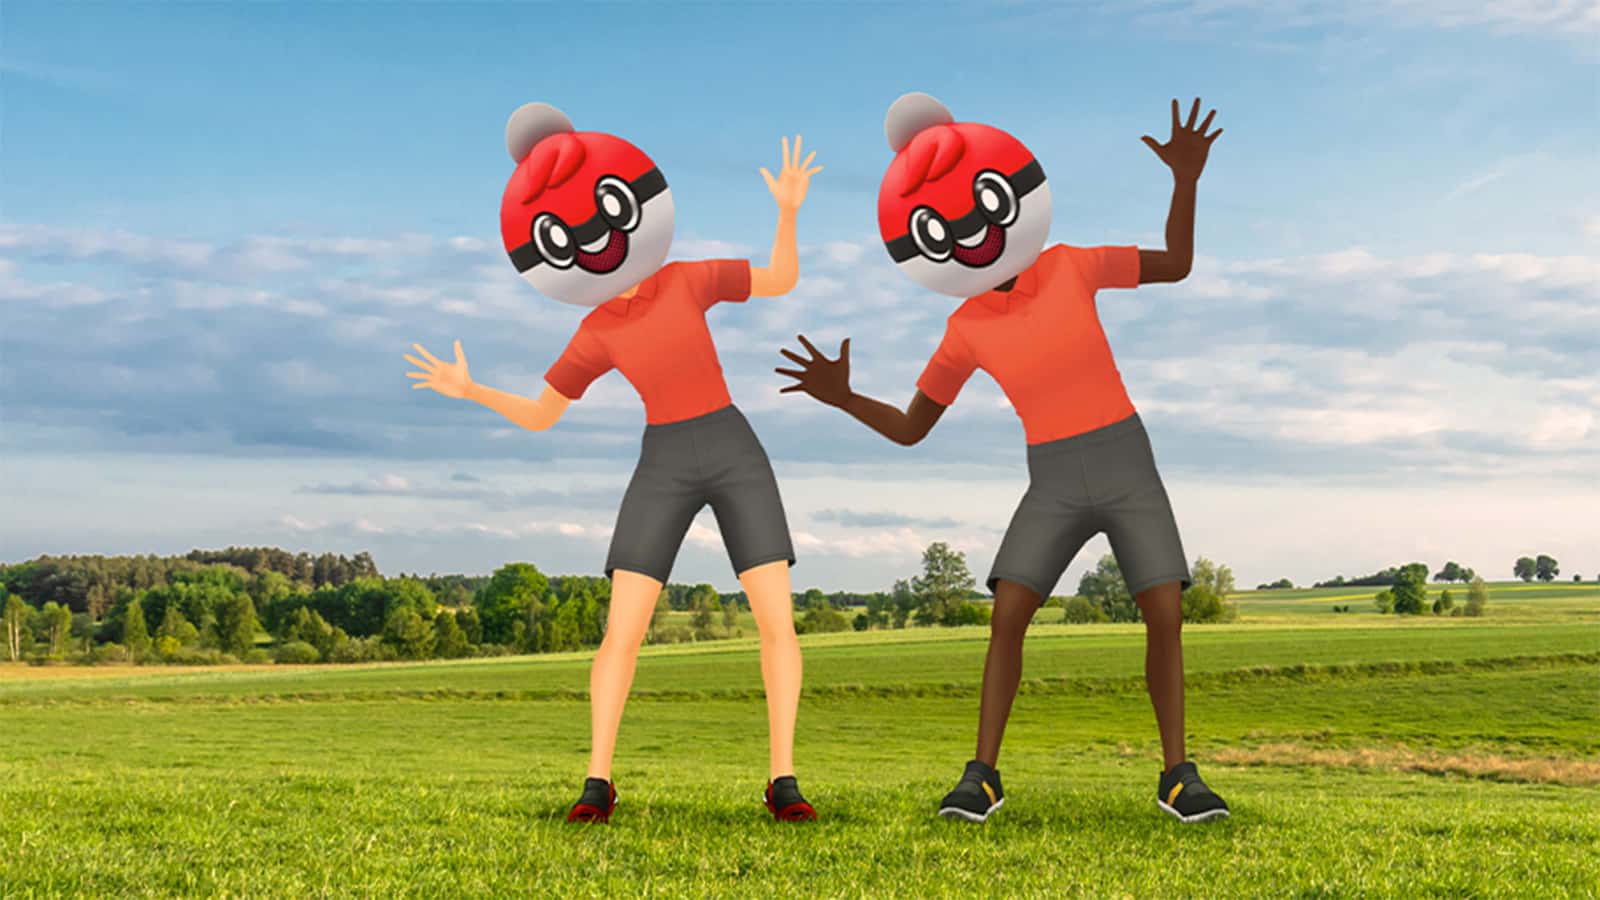 The Ball Guy avatar outfit in Pokemon GO